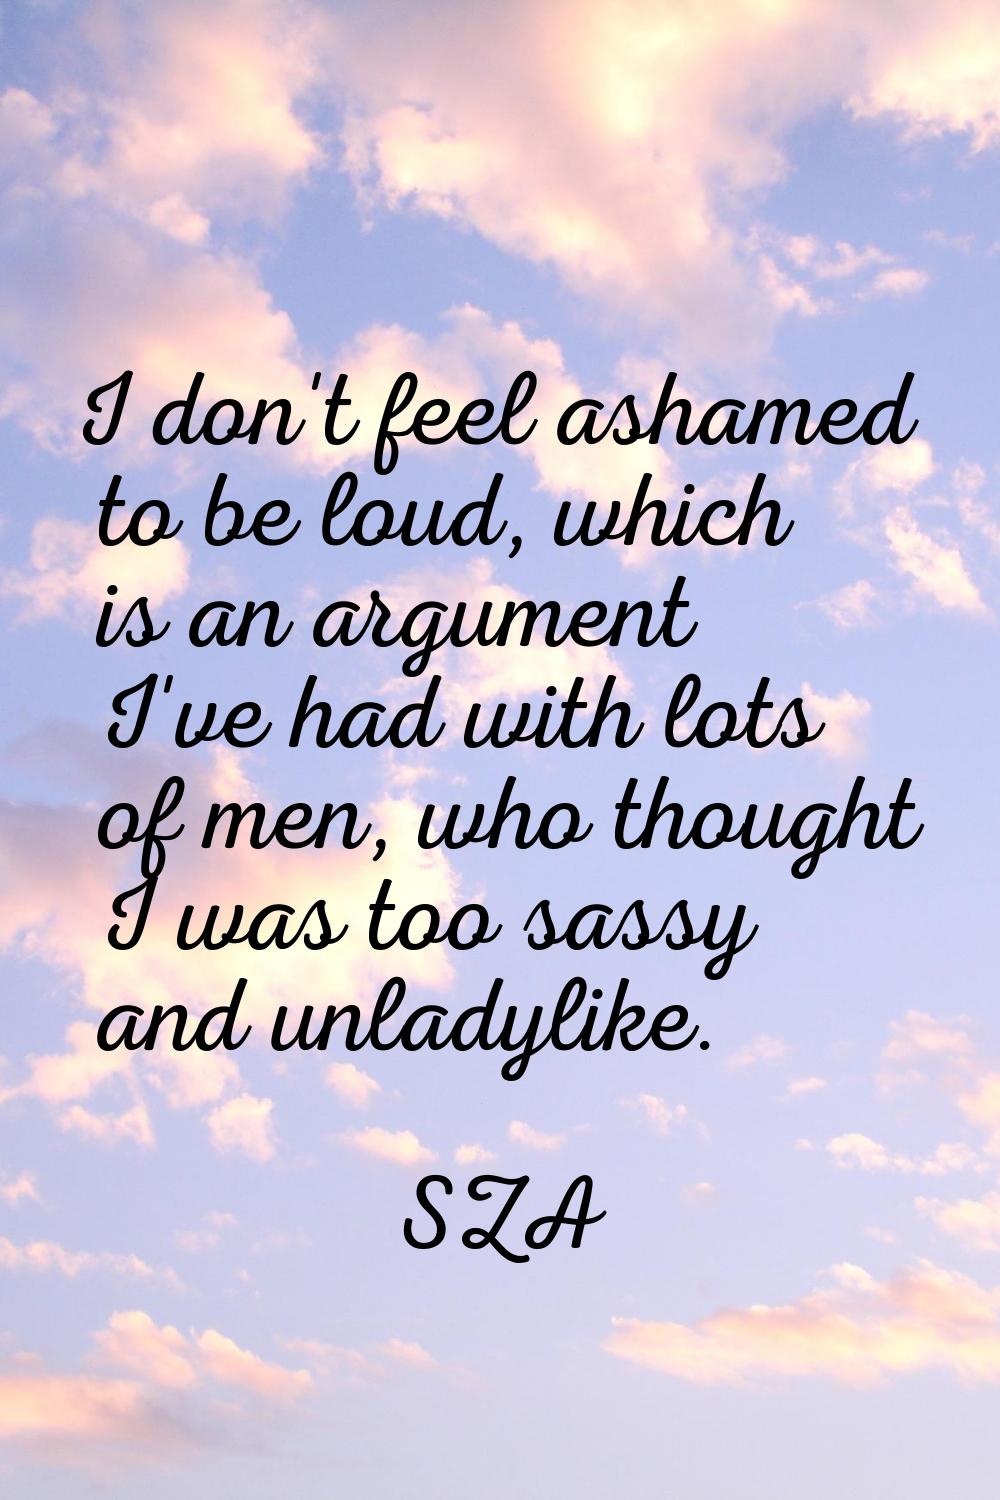 I don't feel ashamed to be loud, which is an argument I've had with lots of men, who thought I was 